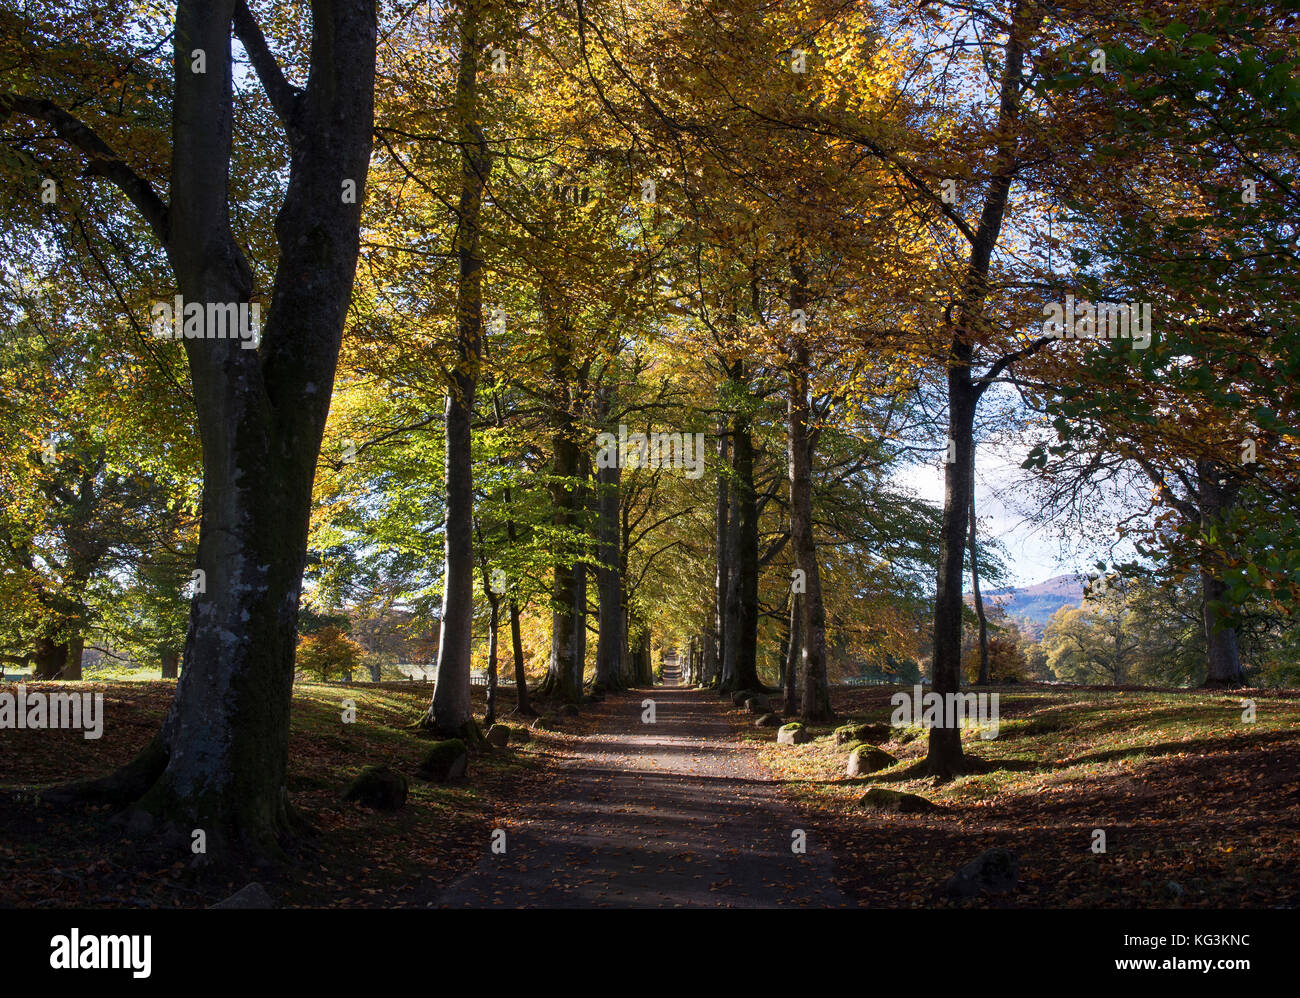 Beech tree avenue at the entrance to Drummond Gardens, near Crieff, Perthshire, Scotland. Stock Photo